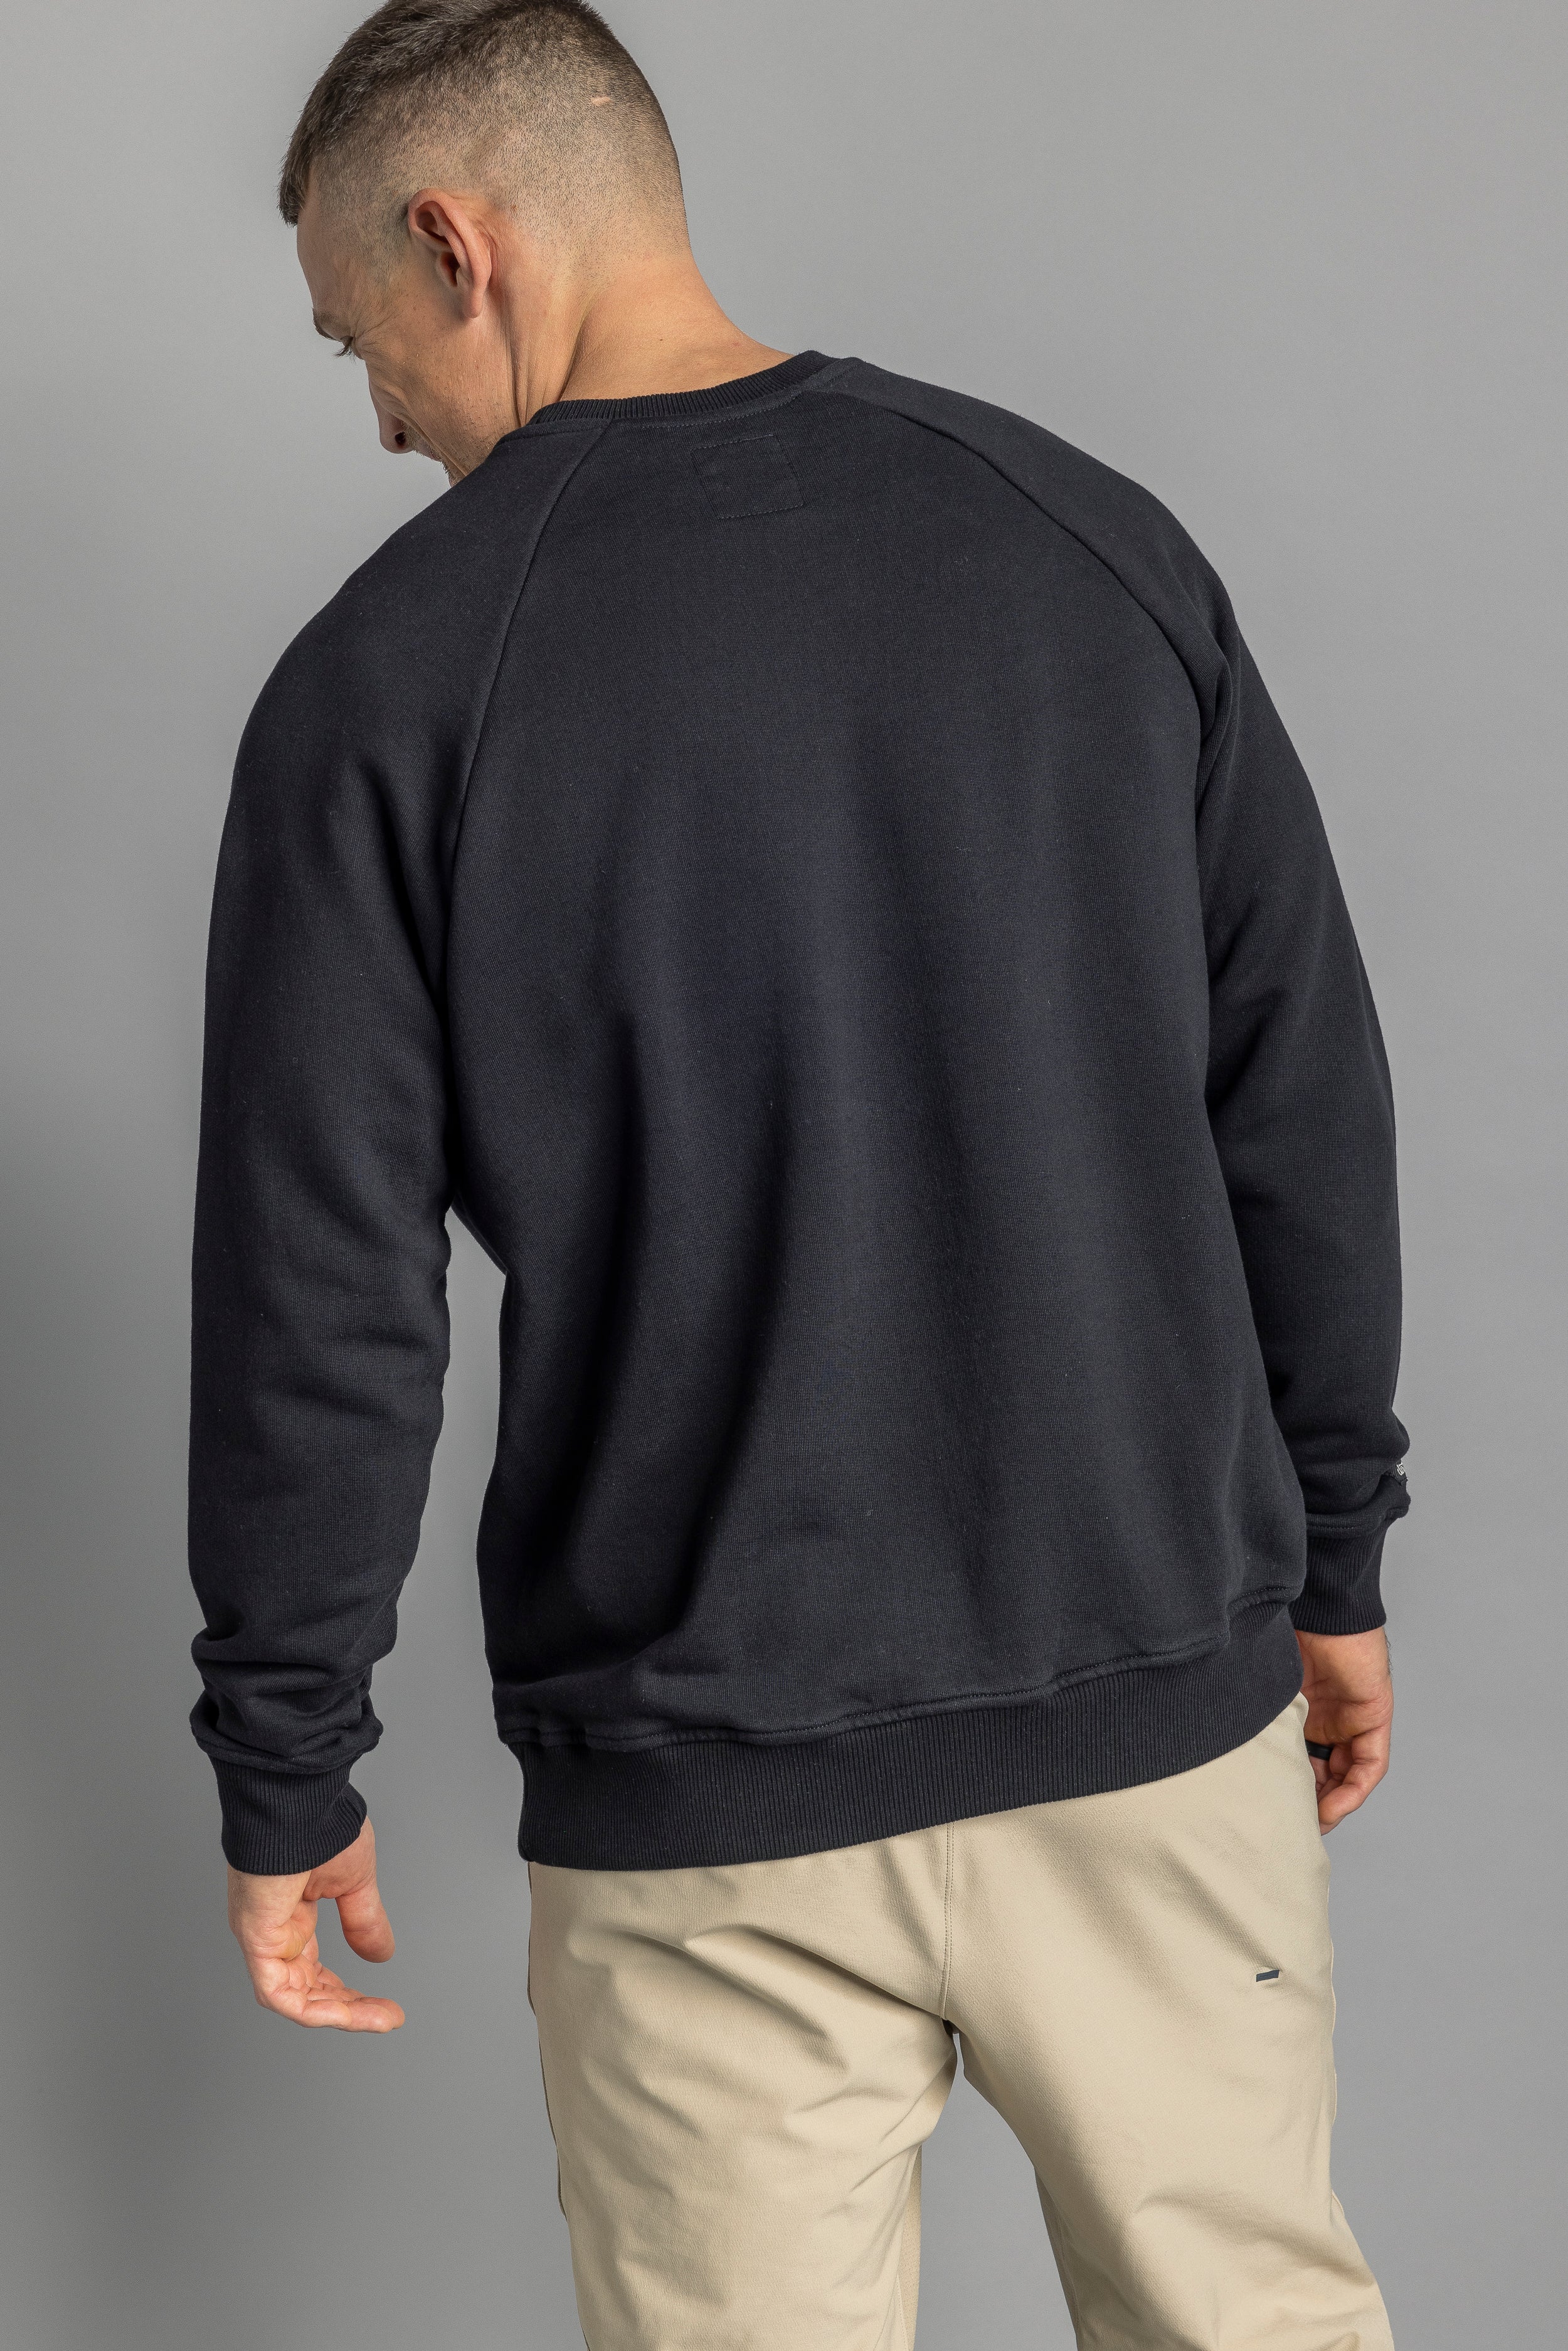 Black sweater raglan made from 100% organic cotton from DIRTS